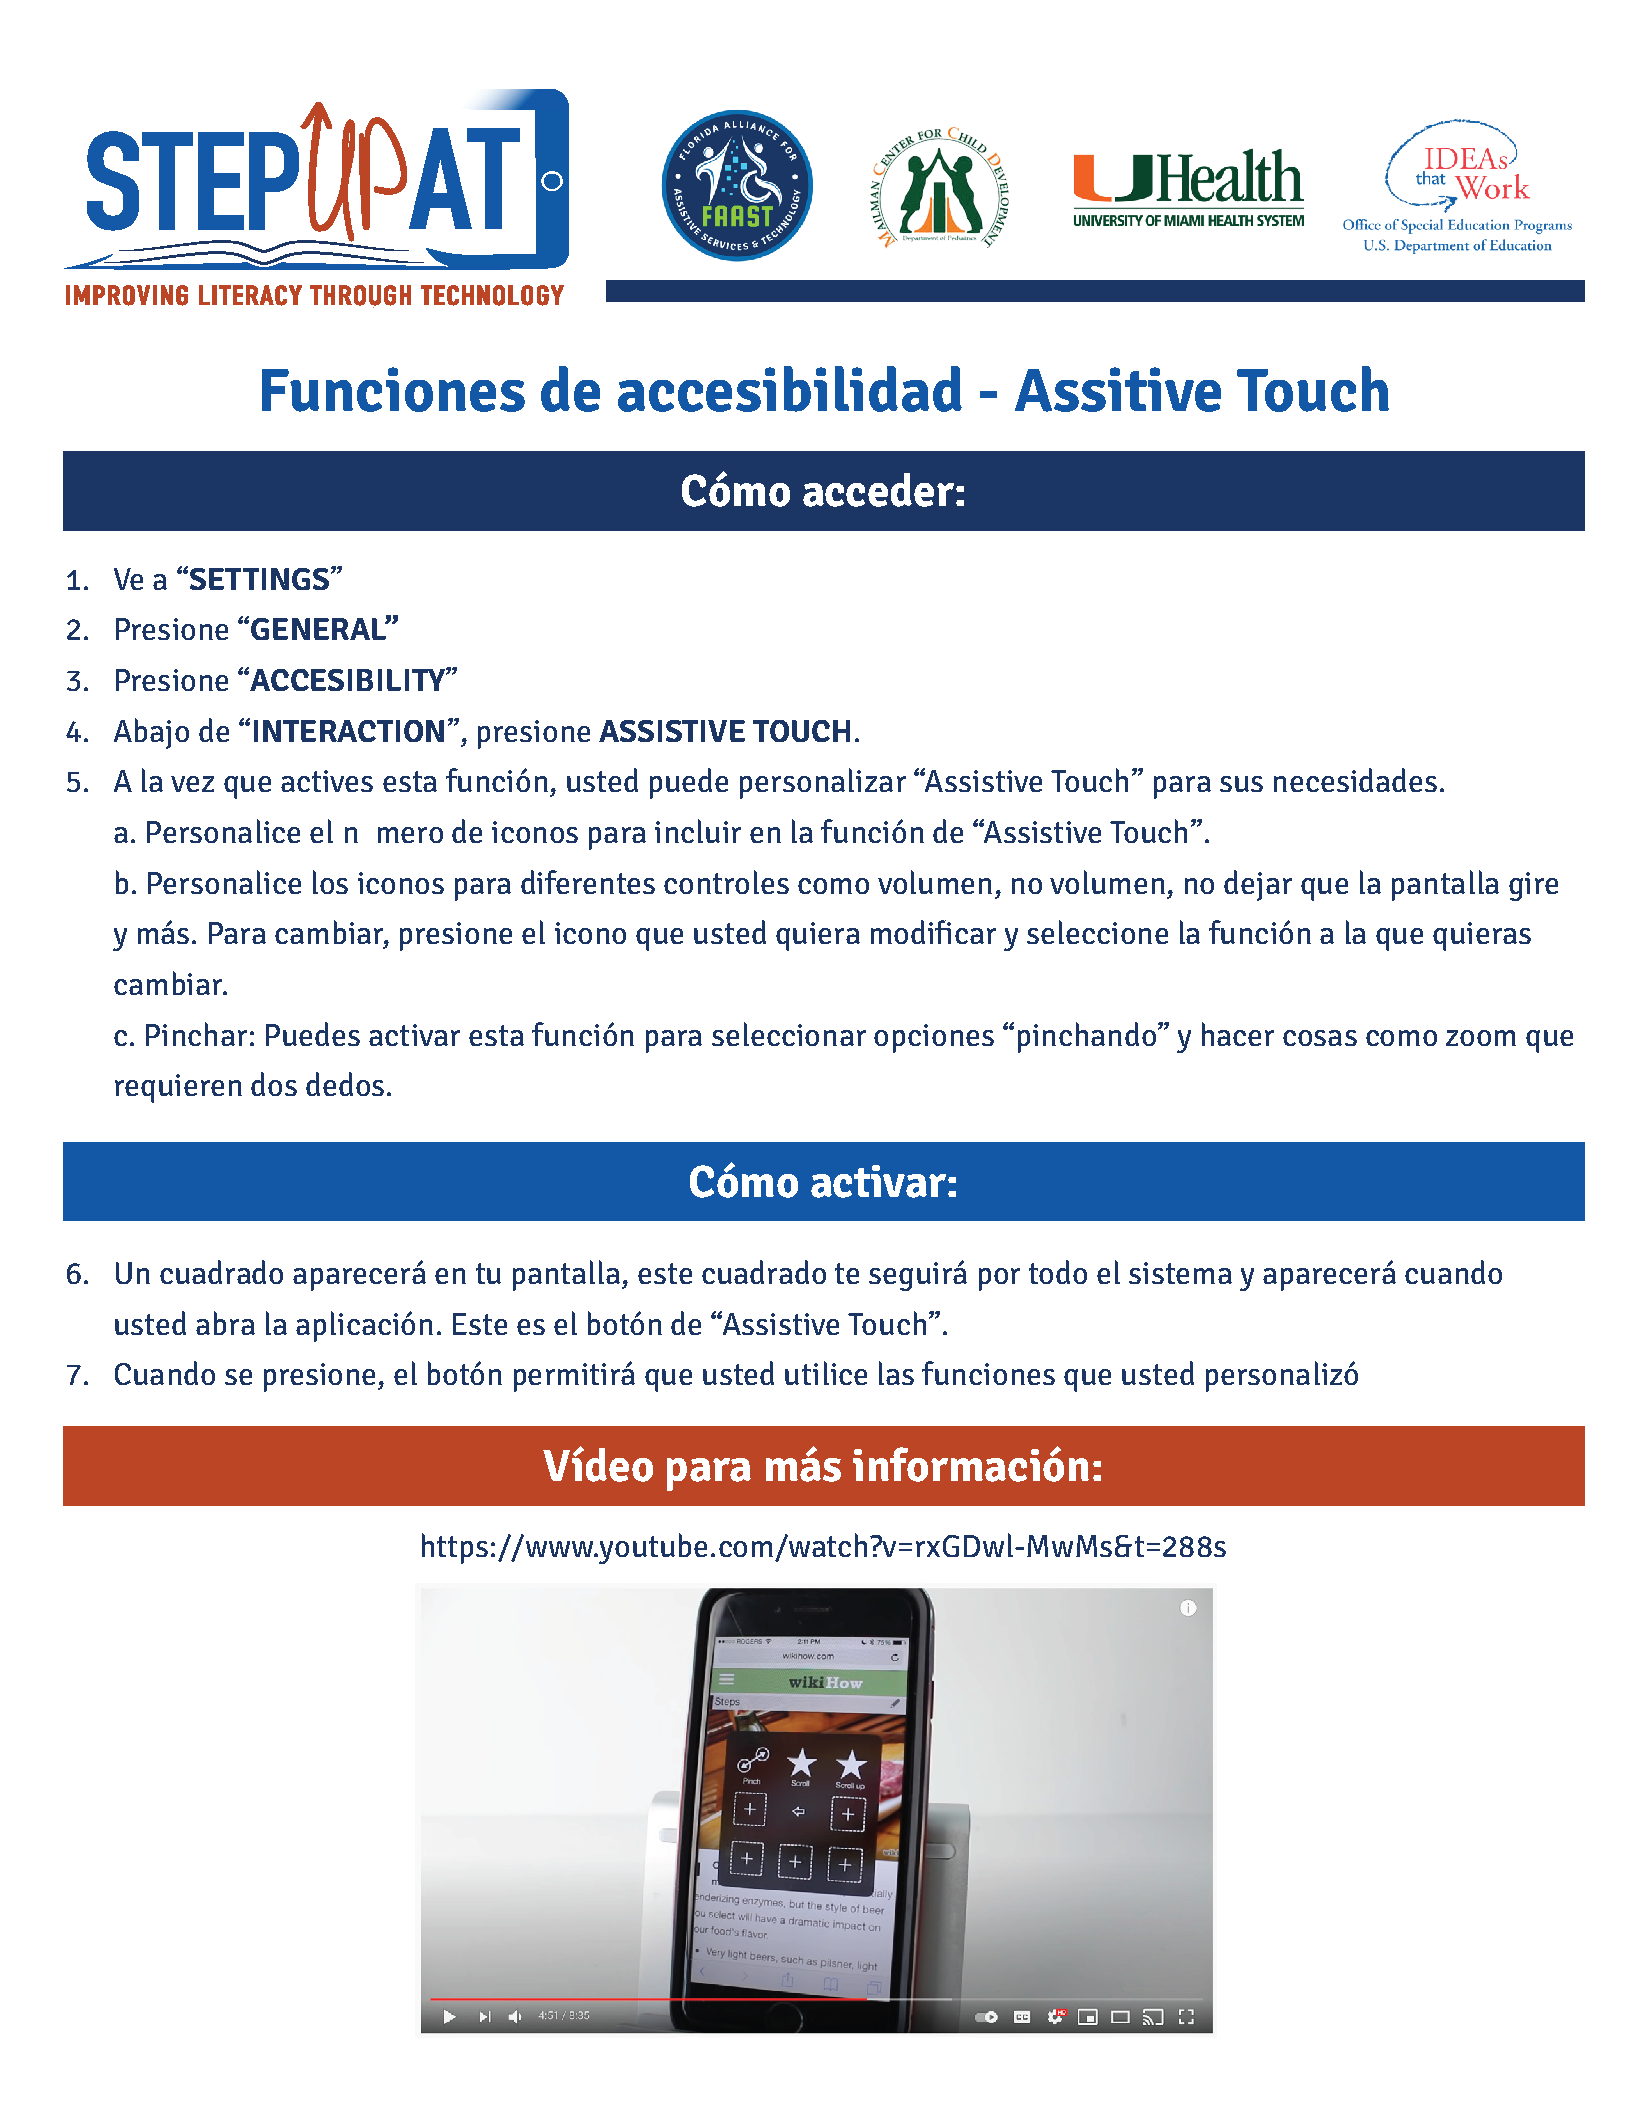 iOS Accessibility and Assistive Touch instructions in Spanish